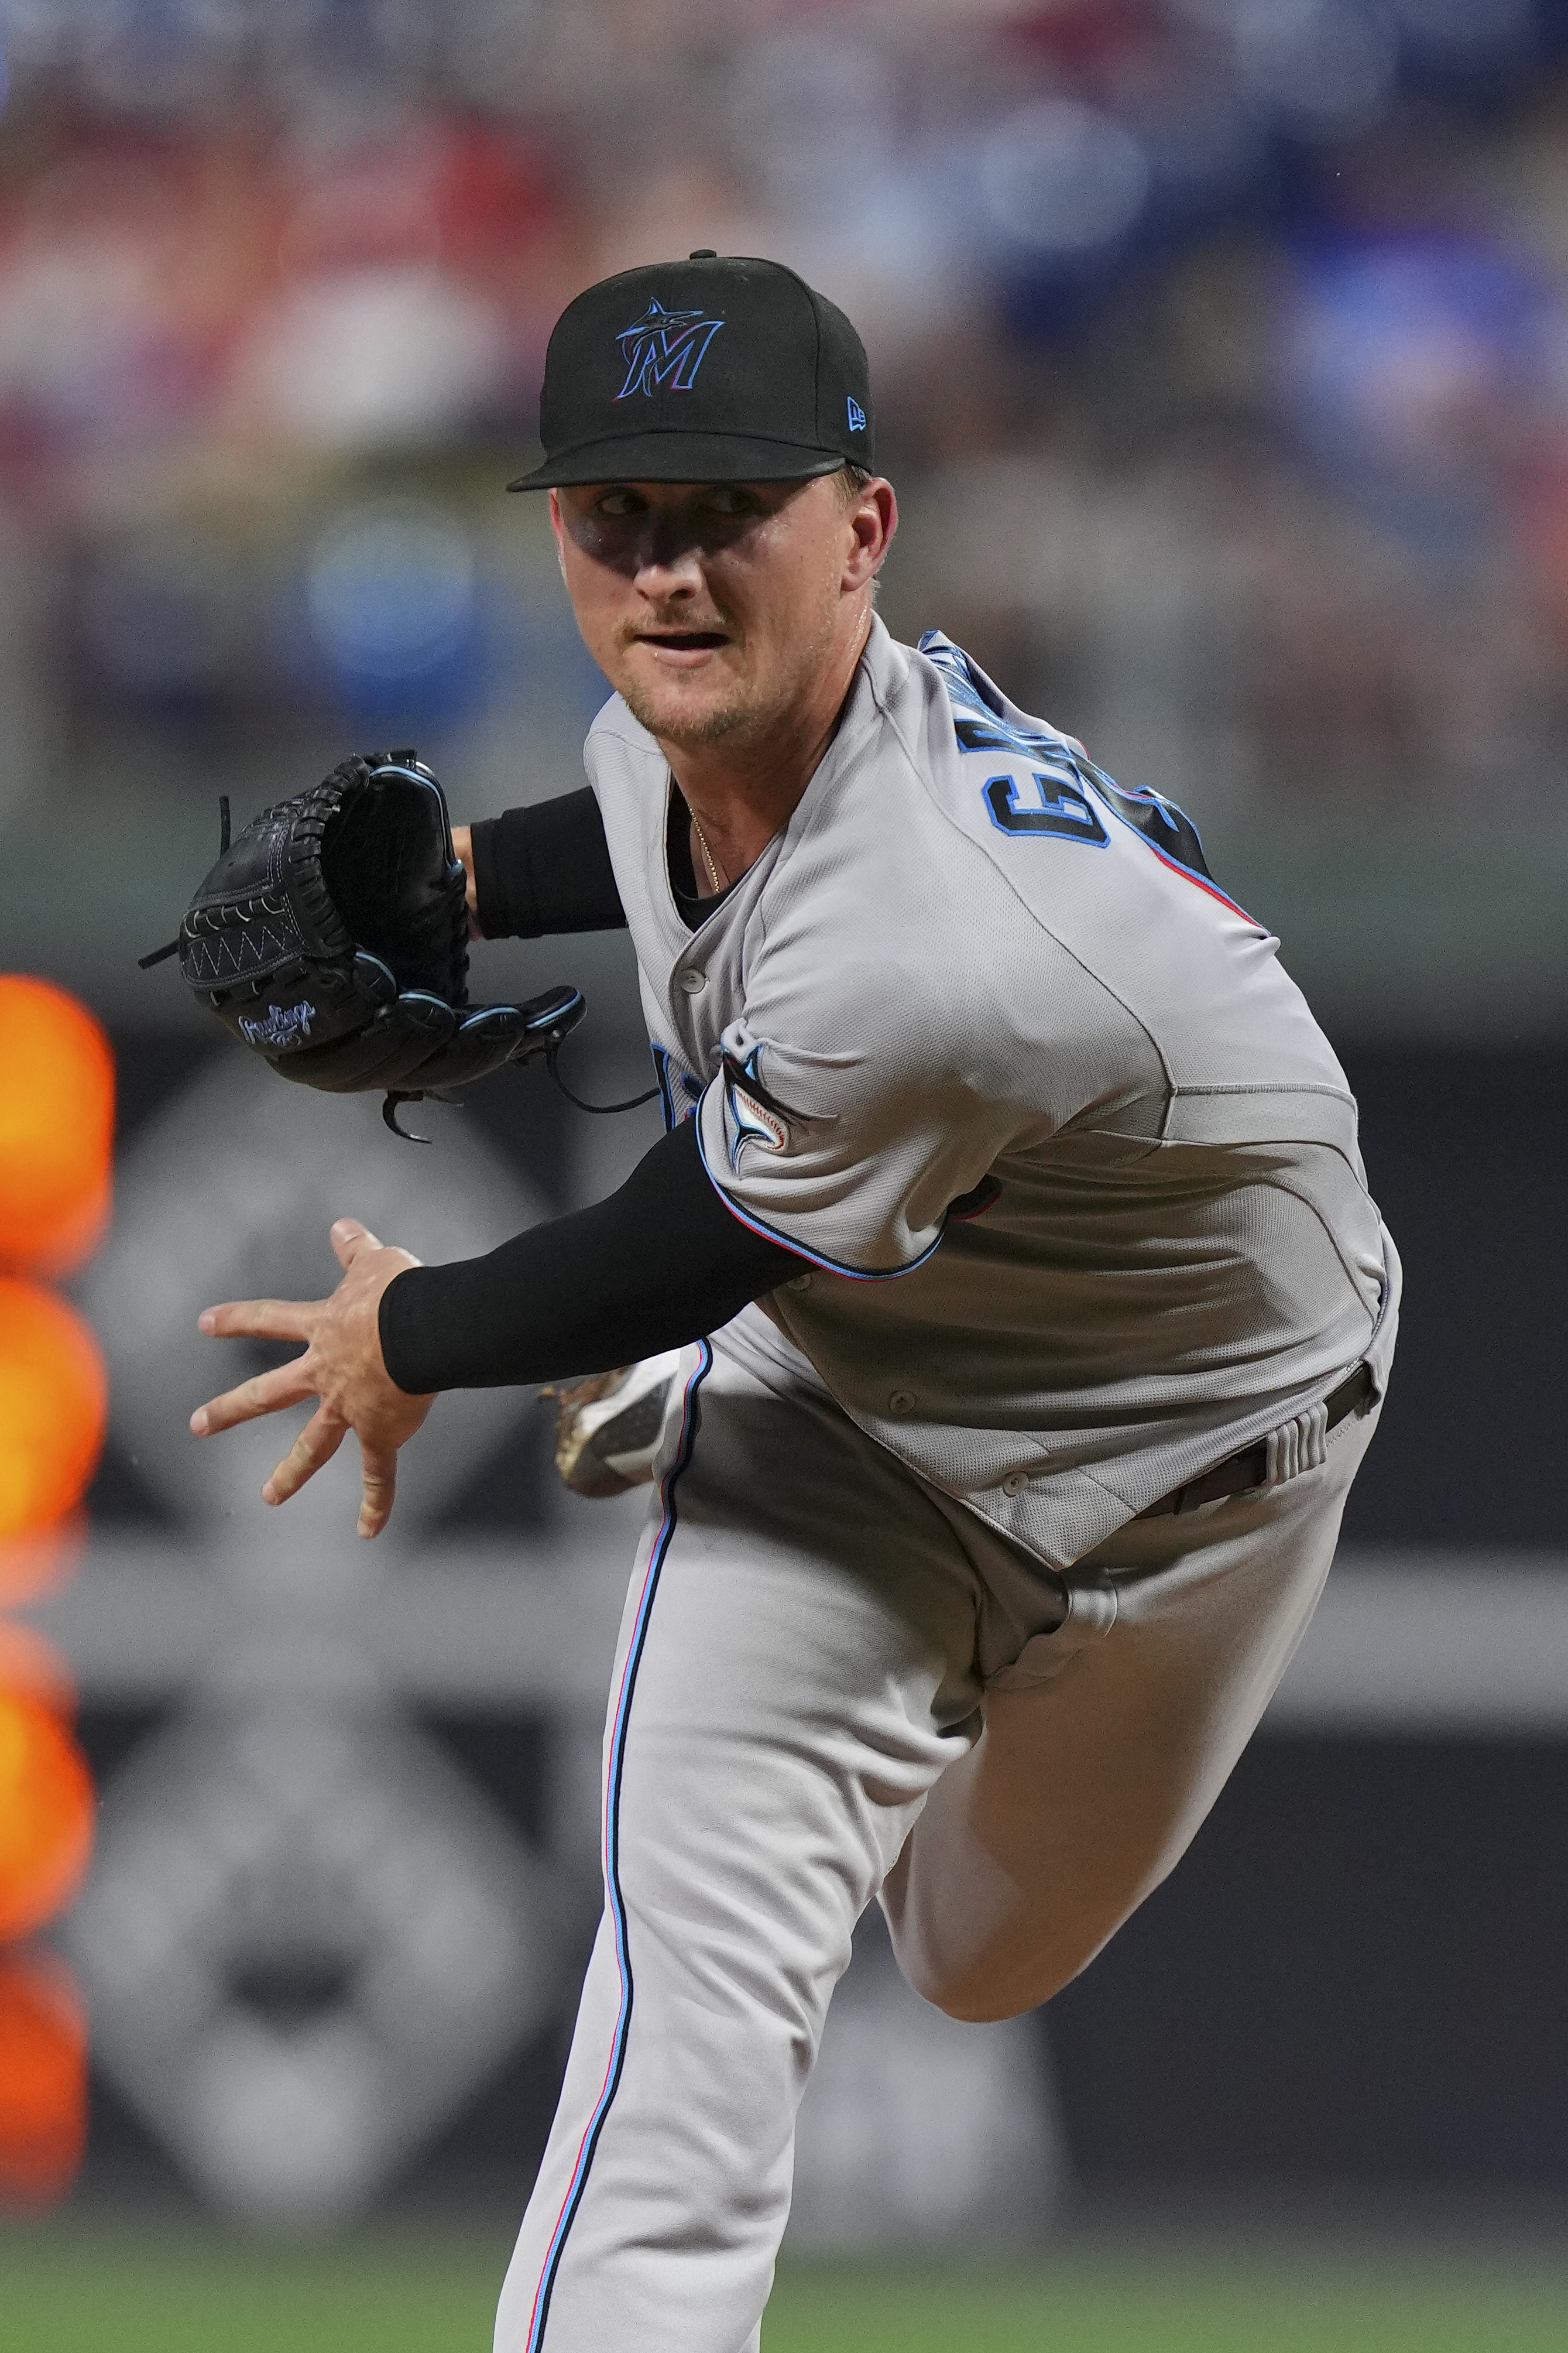 Braxton Garrett #60 of the Miami Marlins throws a pitch against the Philadelphia Phillies at Citizens Bank Park on August 9, 2022 in Philadelphia, Pennsylvania.